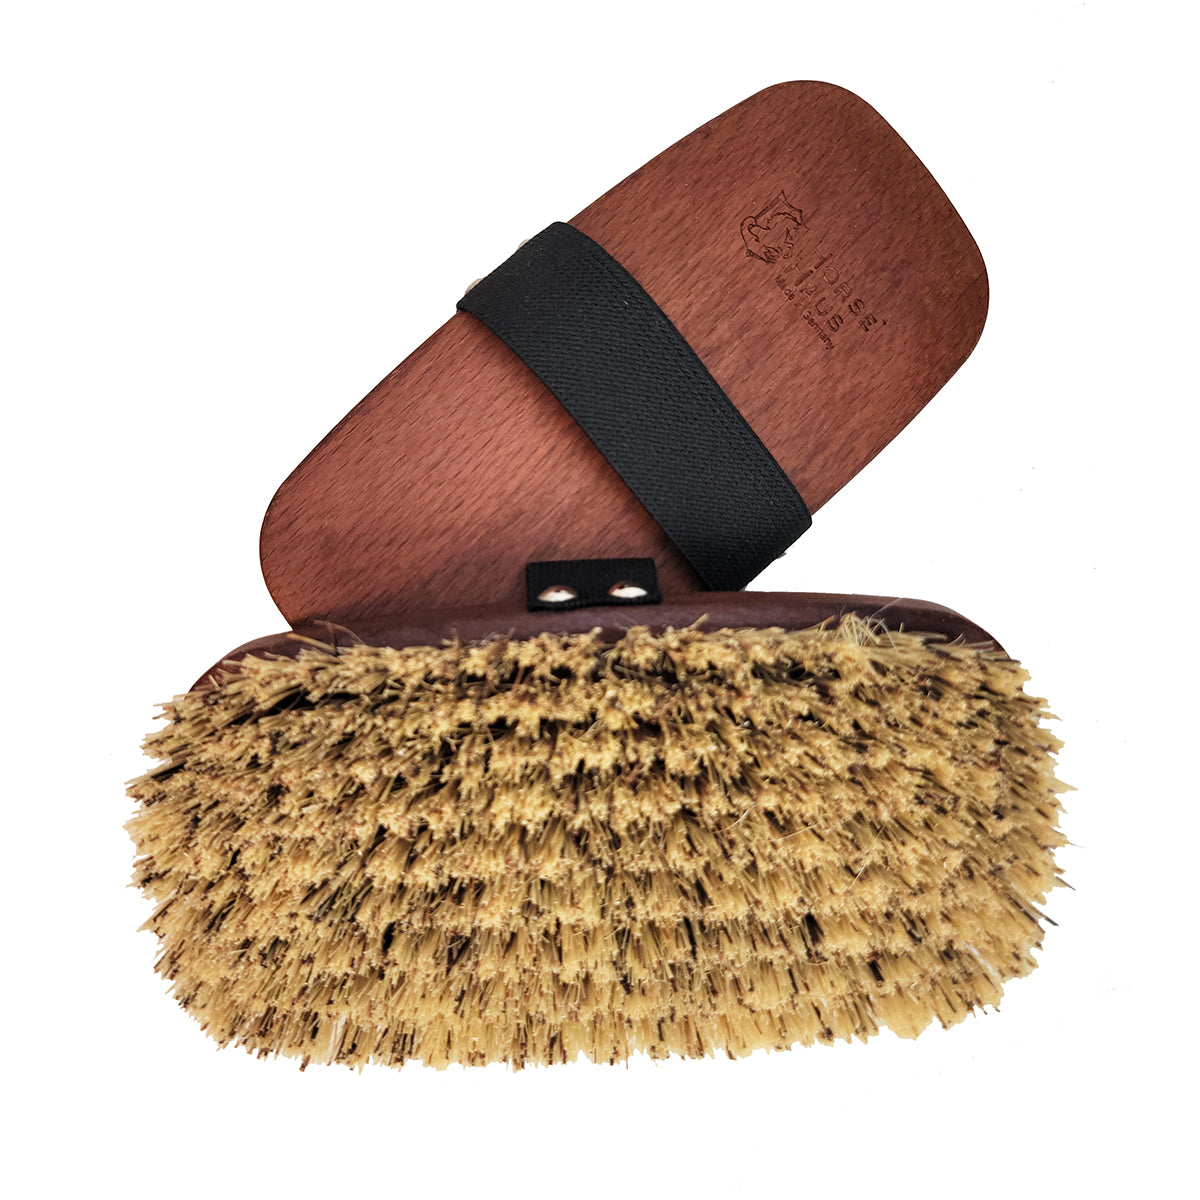 stiff horse grooming brush with natural bristles and brown wood base